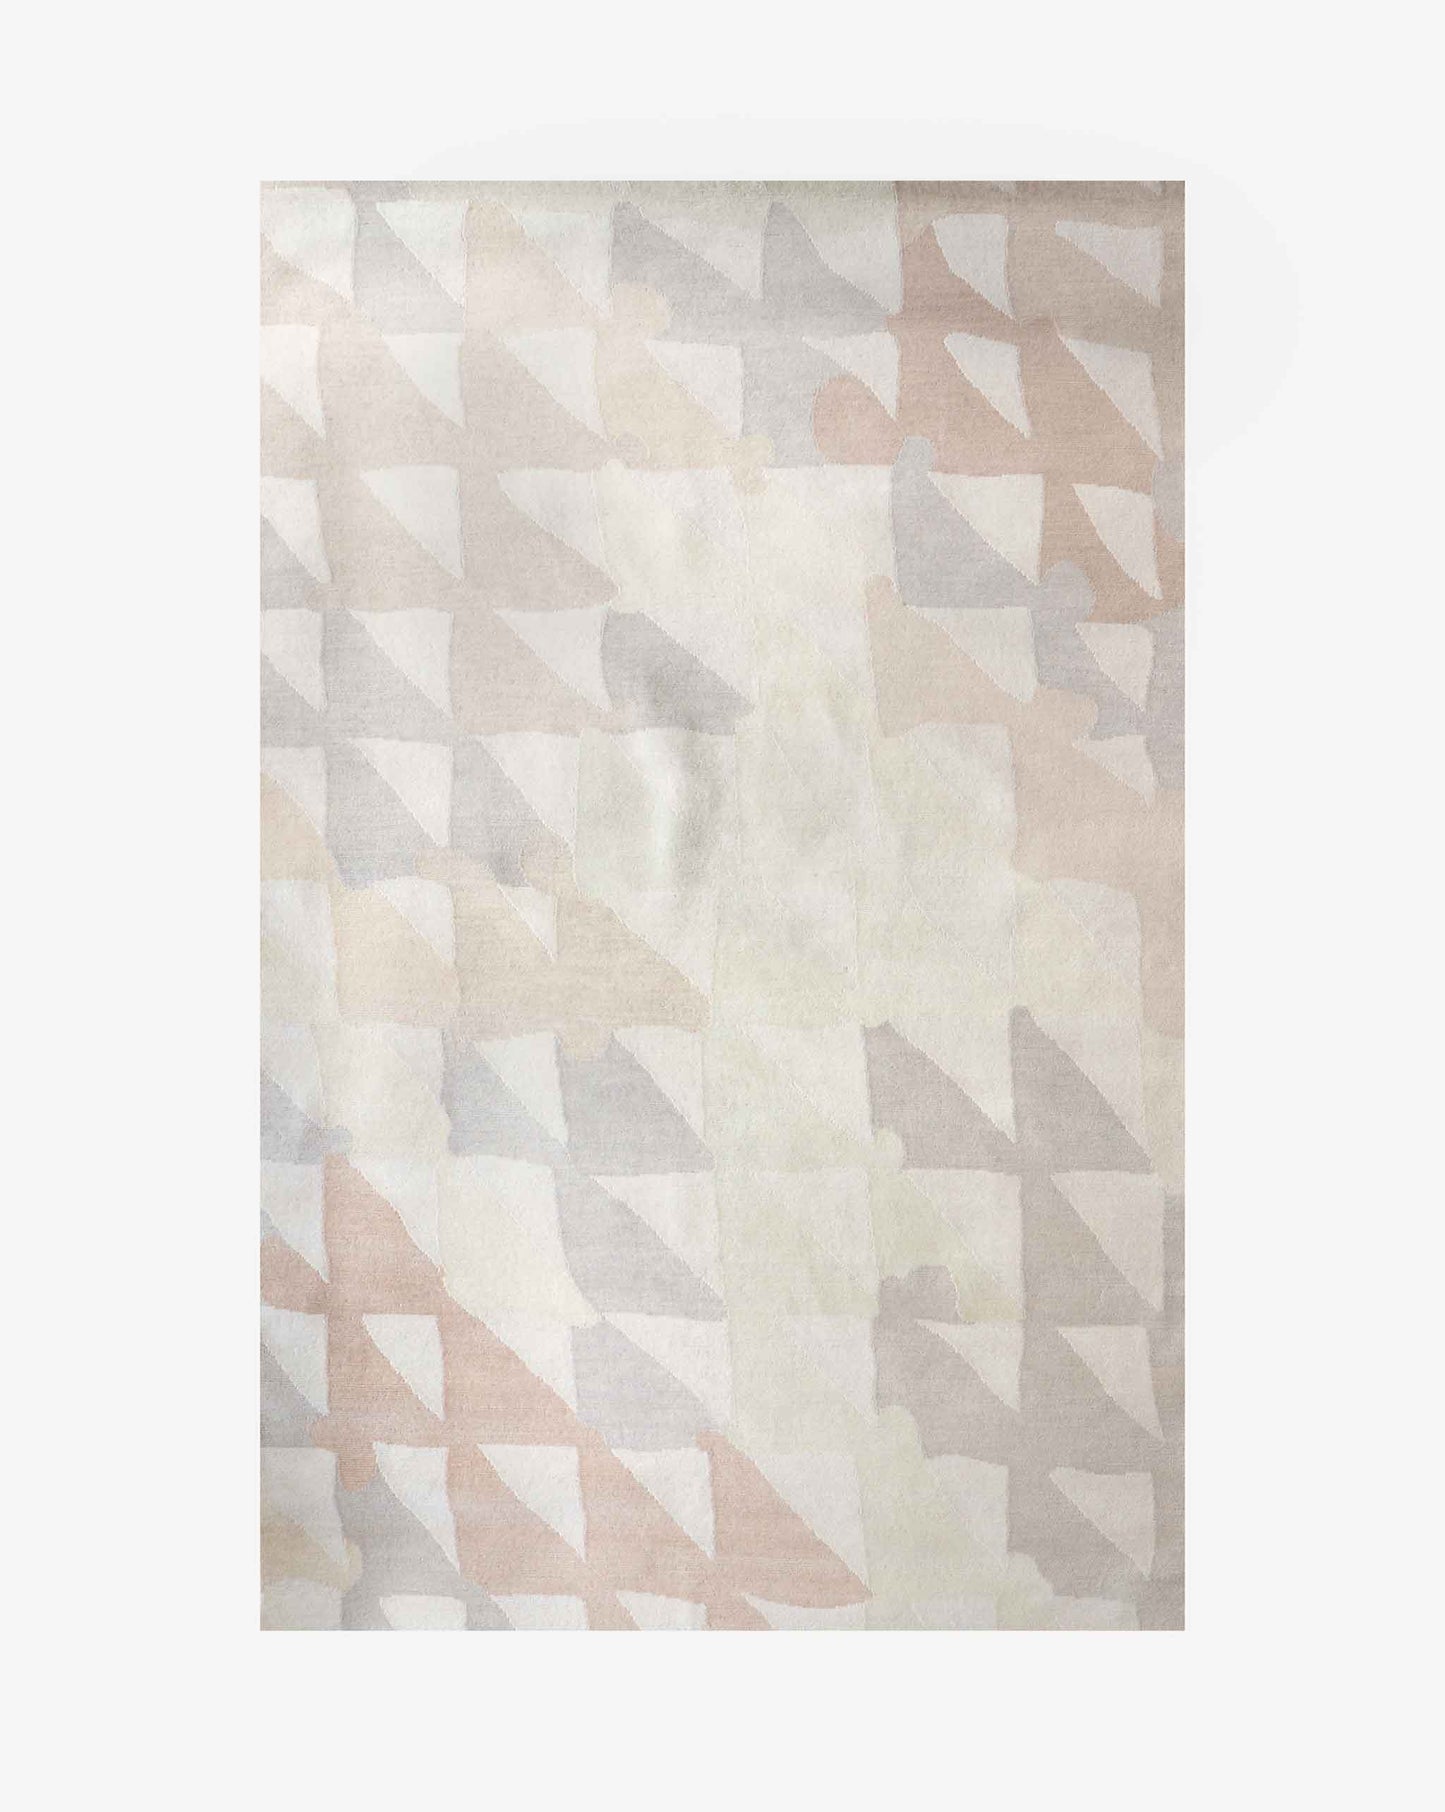 A Tibetan Triangle Checks Hand Knotted Rug 5' x 8' with a geometric pattern of triangle checks on it